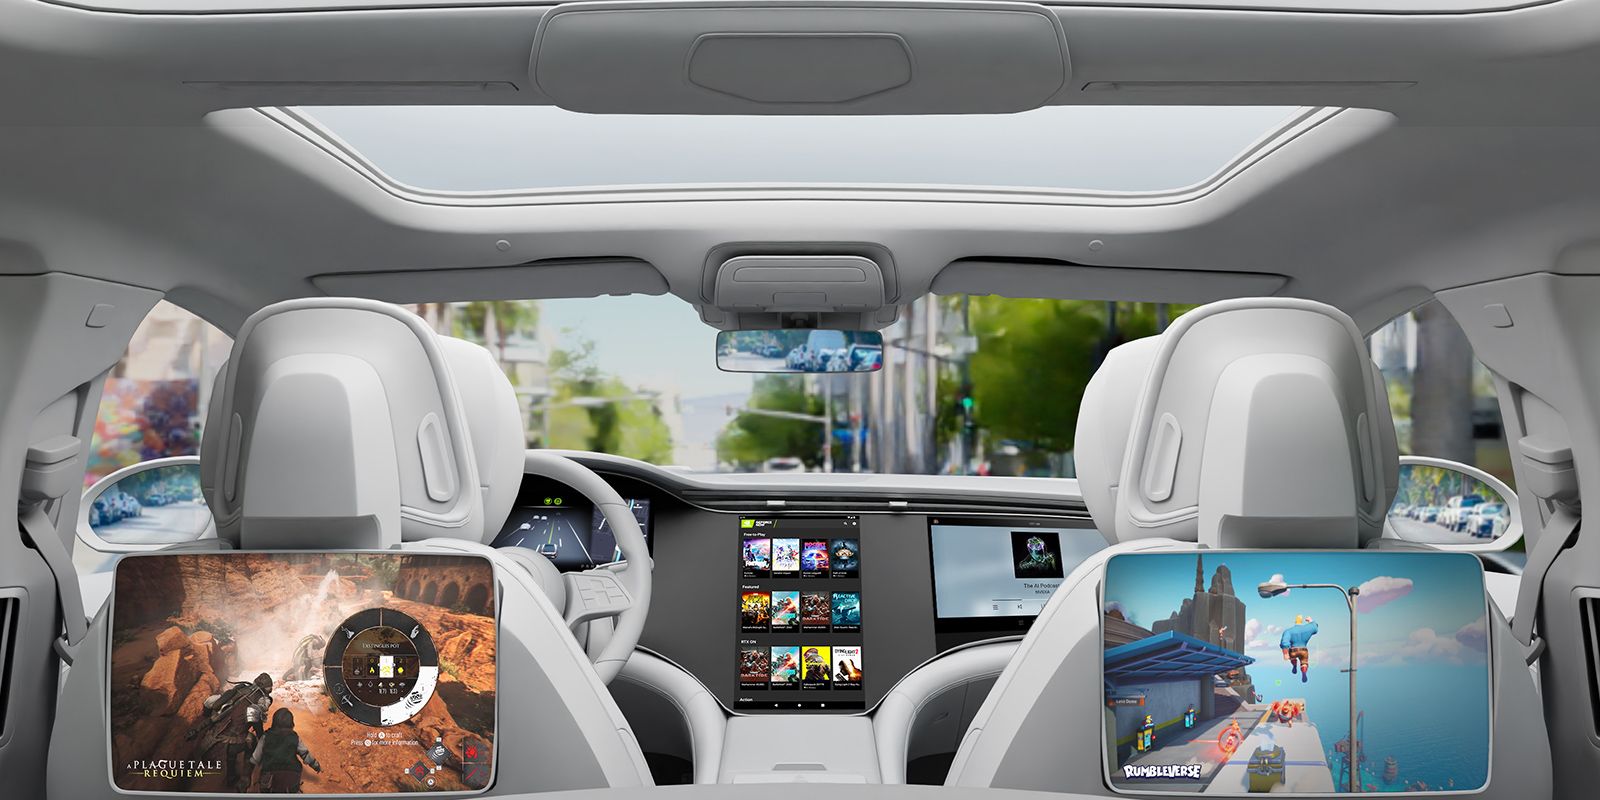 A concept image of Nvidia GeForce Now gaming screens in cars